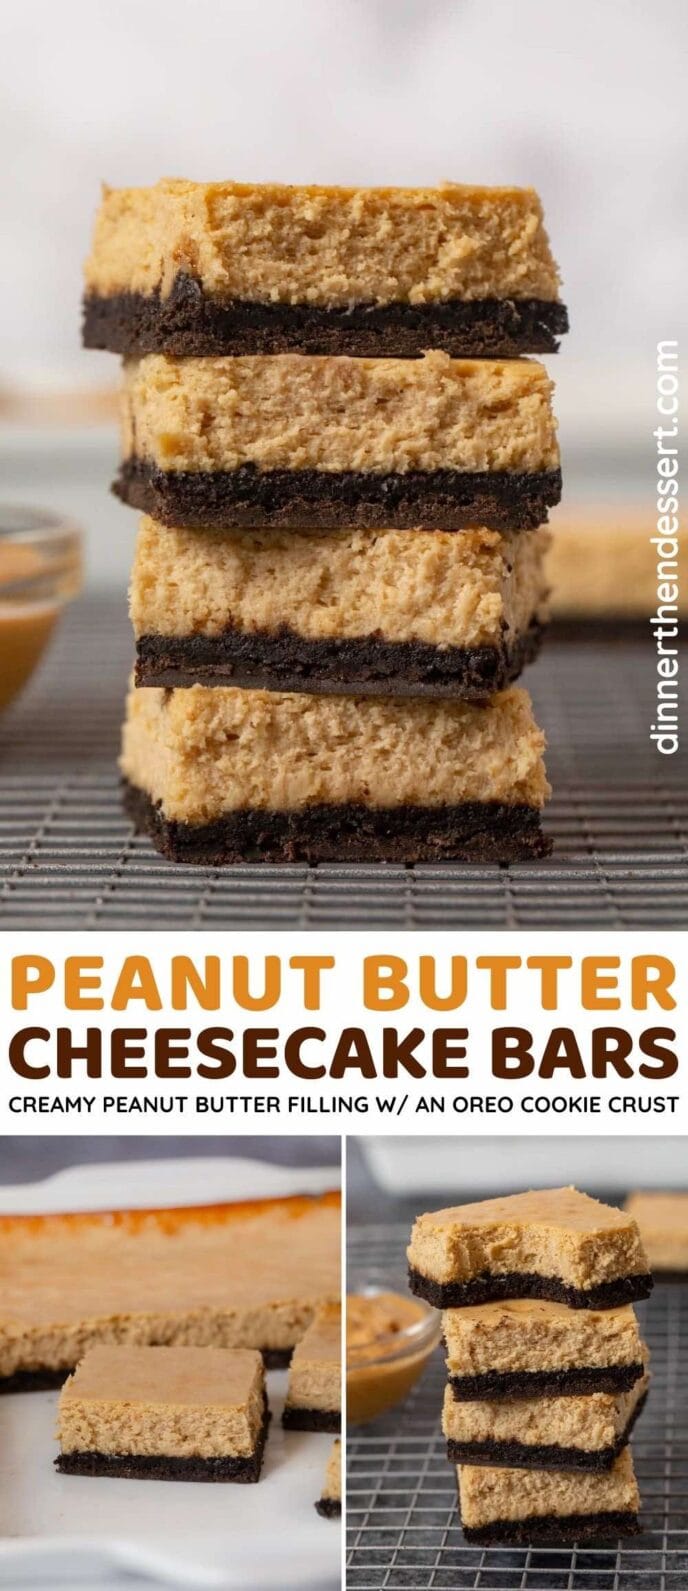 Peanut Butter Cheesecake Bars collage